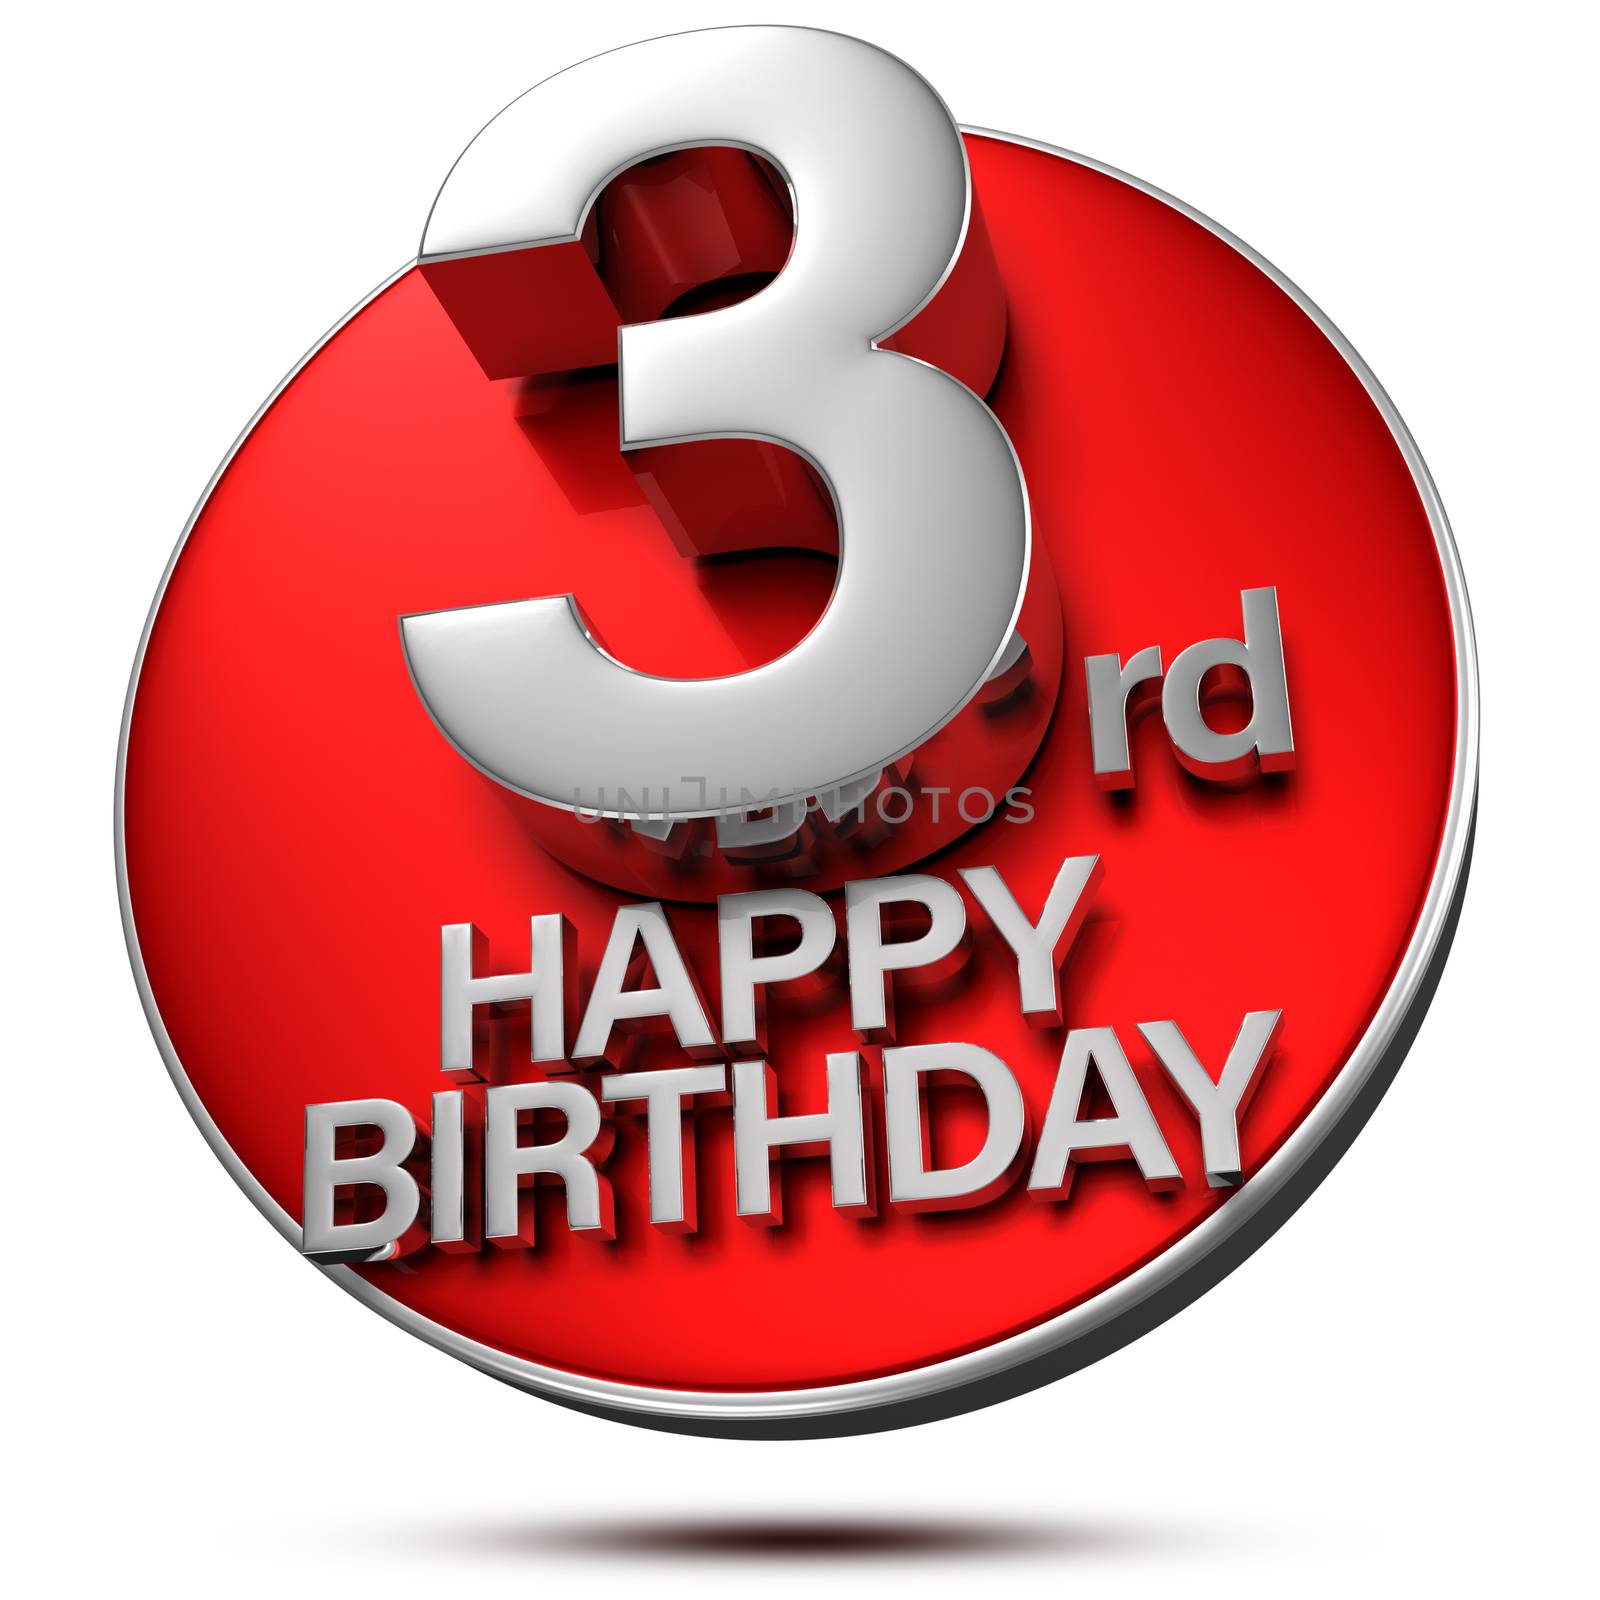 3 rd happy birthday 3d rendering on white background.(with Clipping Path).